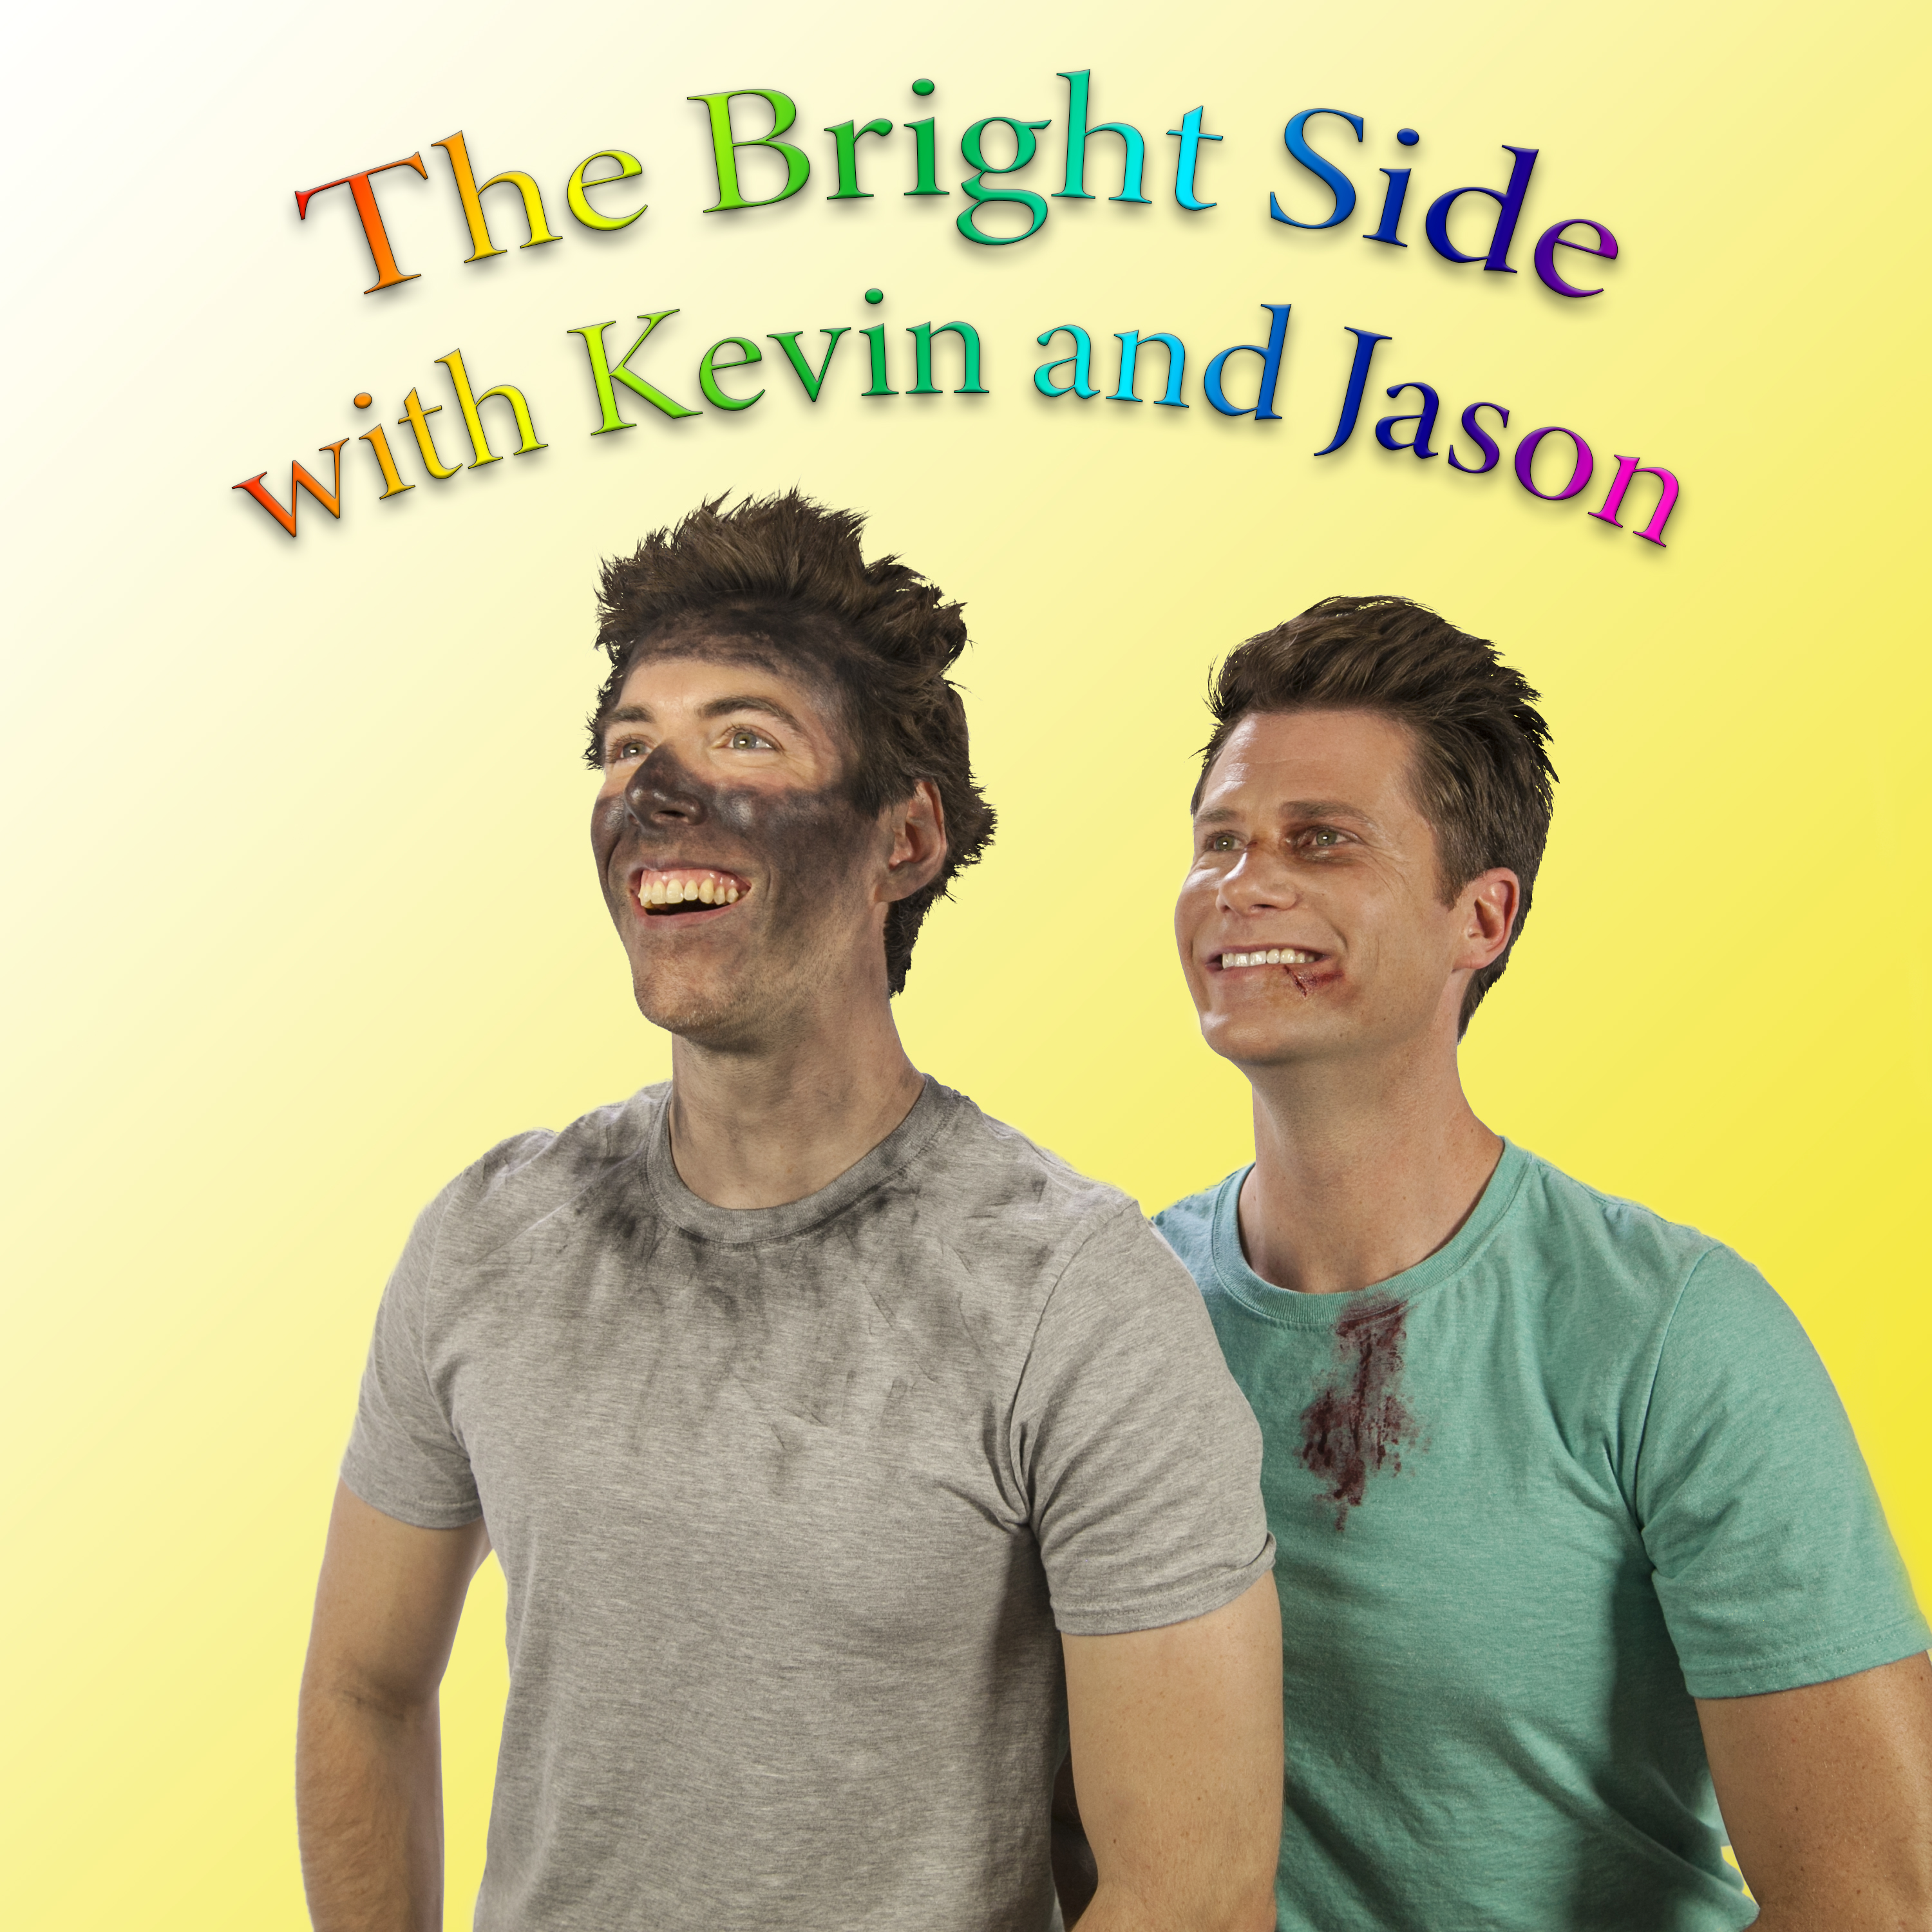 The Bright Side with Kevin & Jason